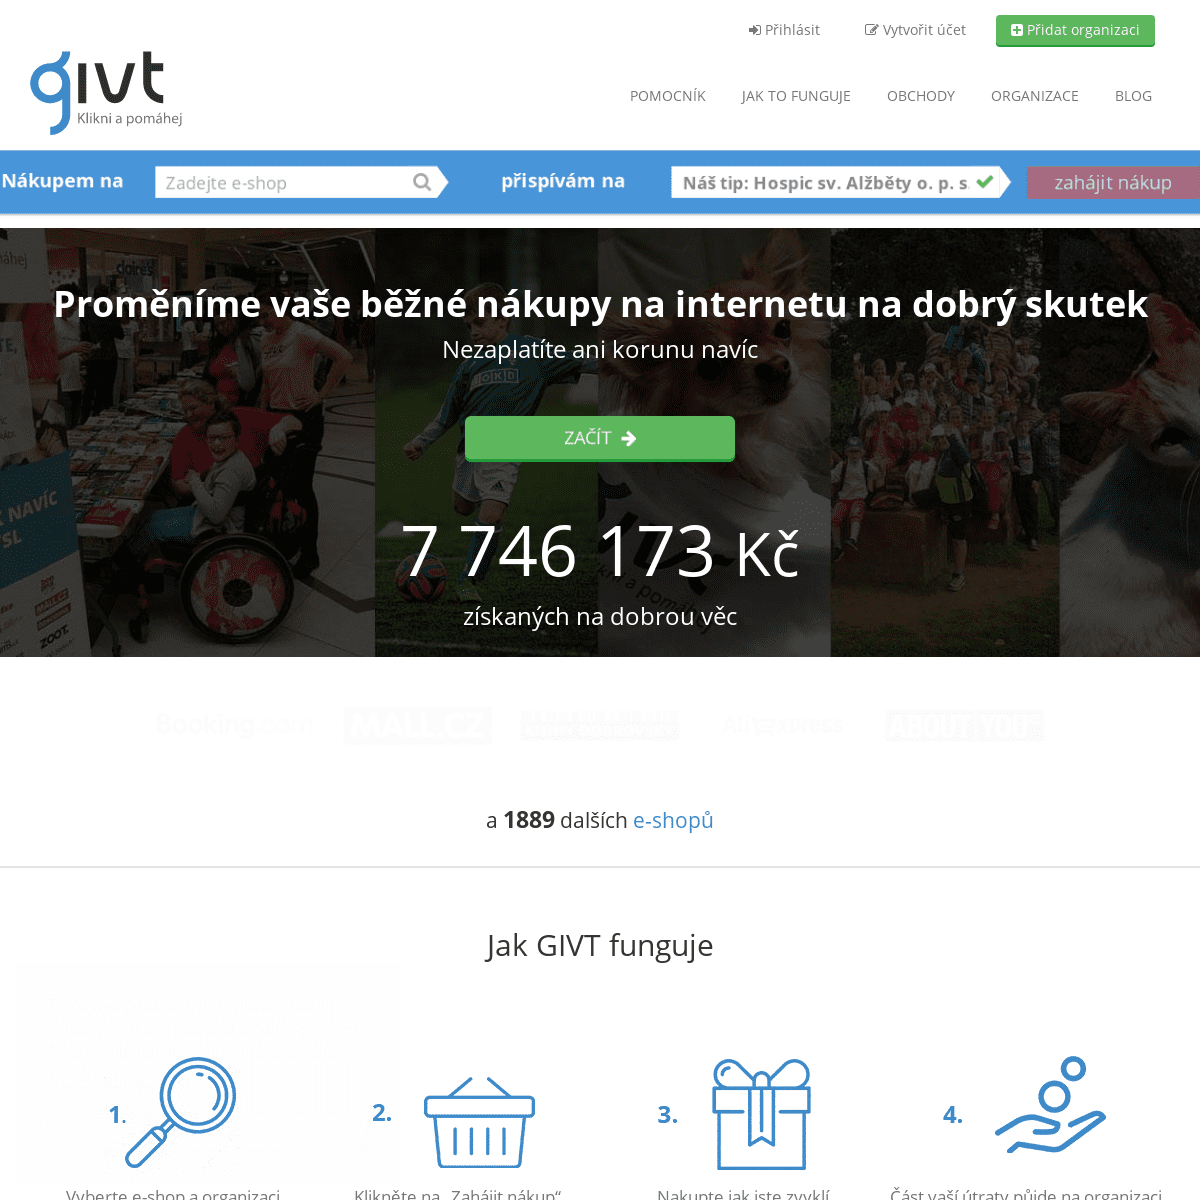 A complete backup of https://givt.cz